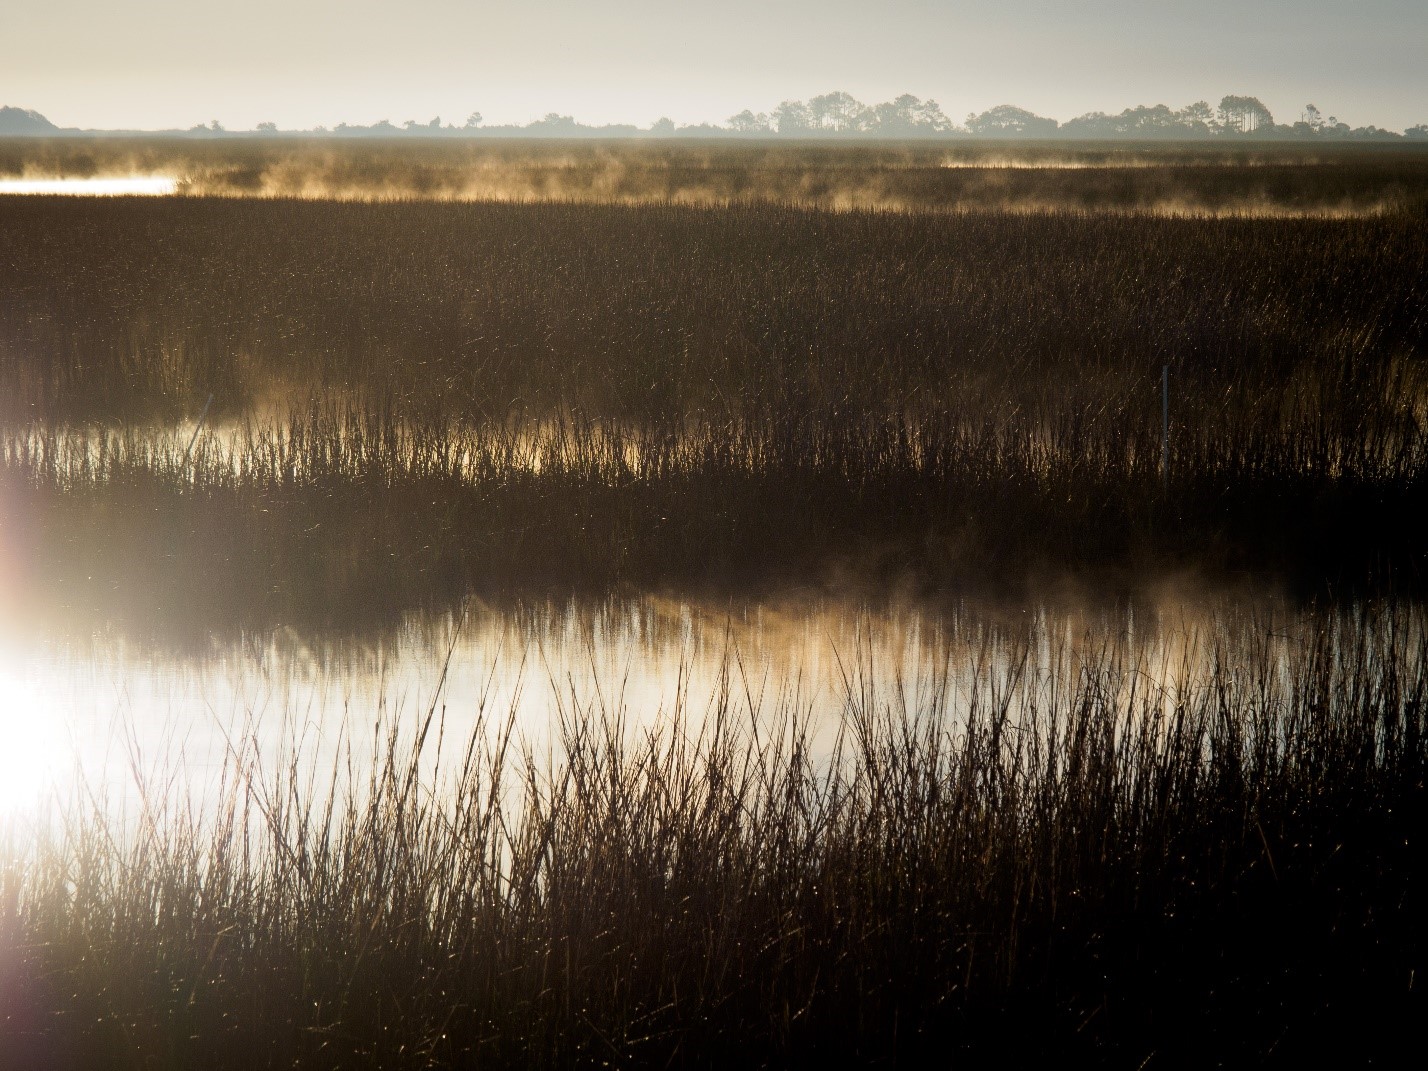 Fog rises from water meandering through marsh grass.